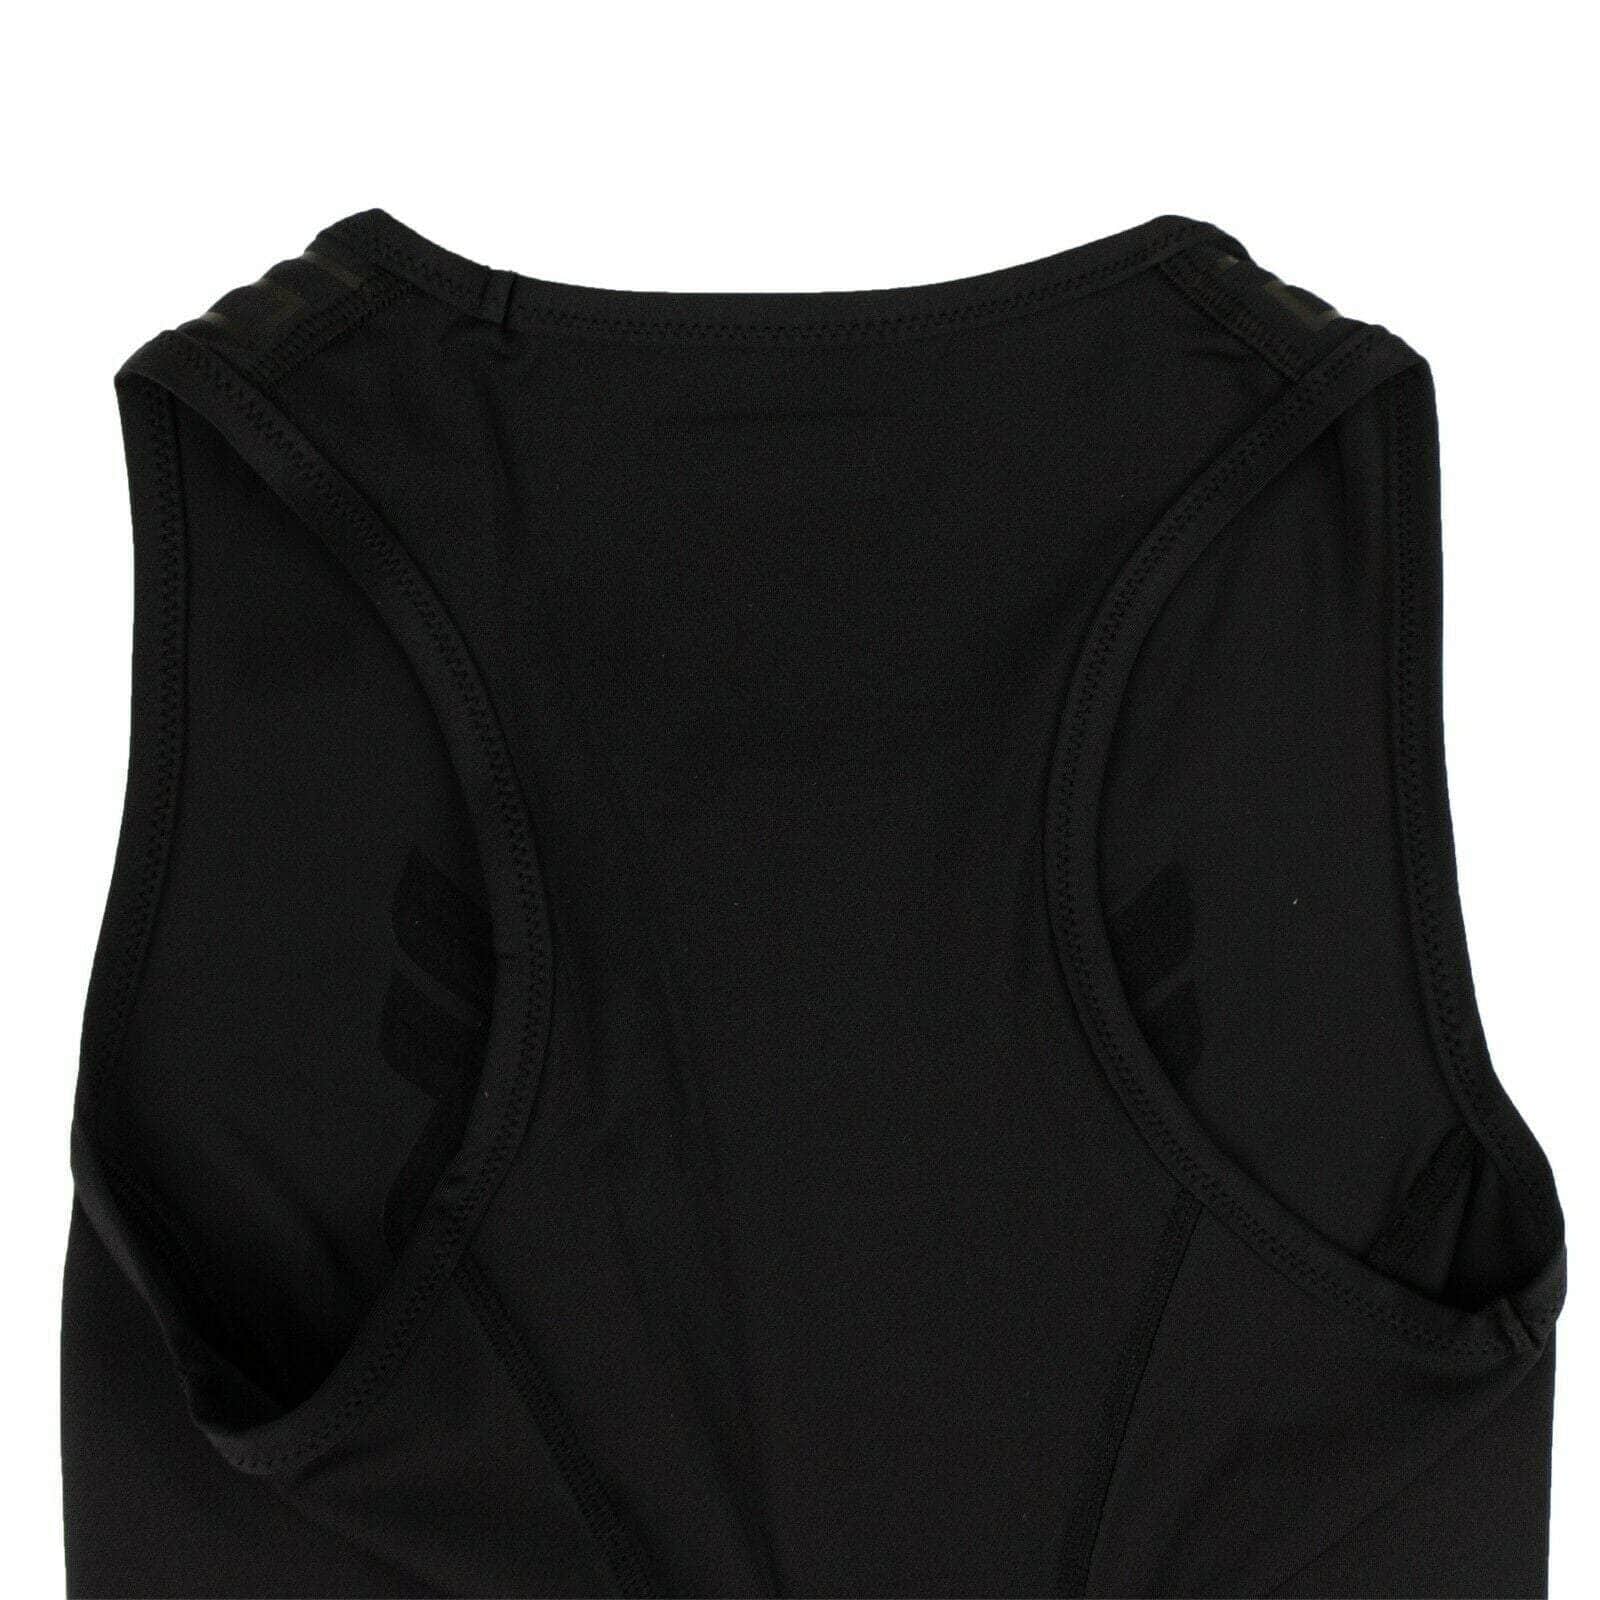 Fendi 250-500, chicmi, couponcollection, fendi, gender-womens, july4th, main-clothing, sale-enable, size-38, womens-athletic-top, womens-tank-tops 38 Women's Black Graphic Logo Tank Top 75LE-1473/38 75LE-1473/38